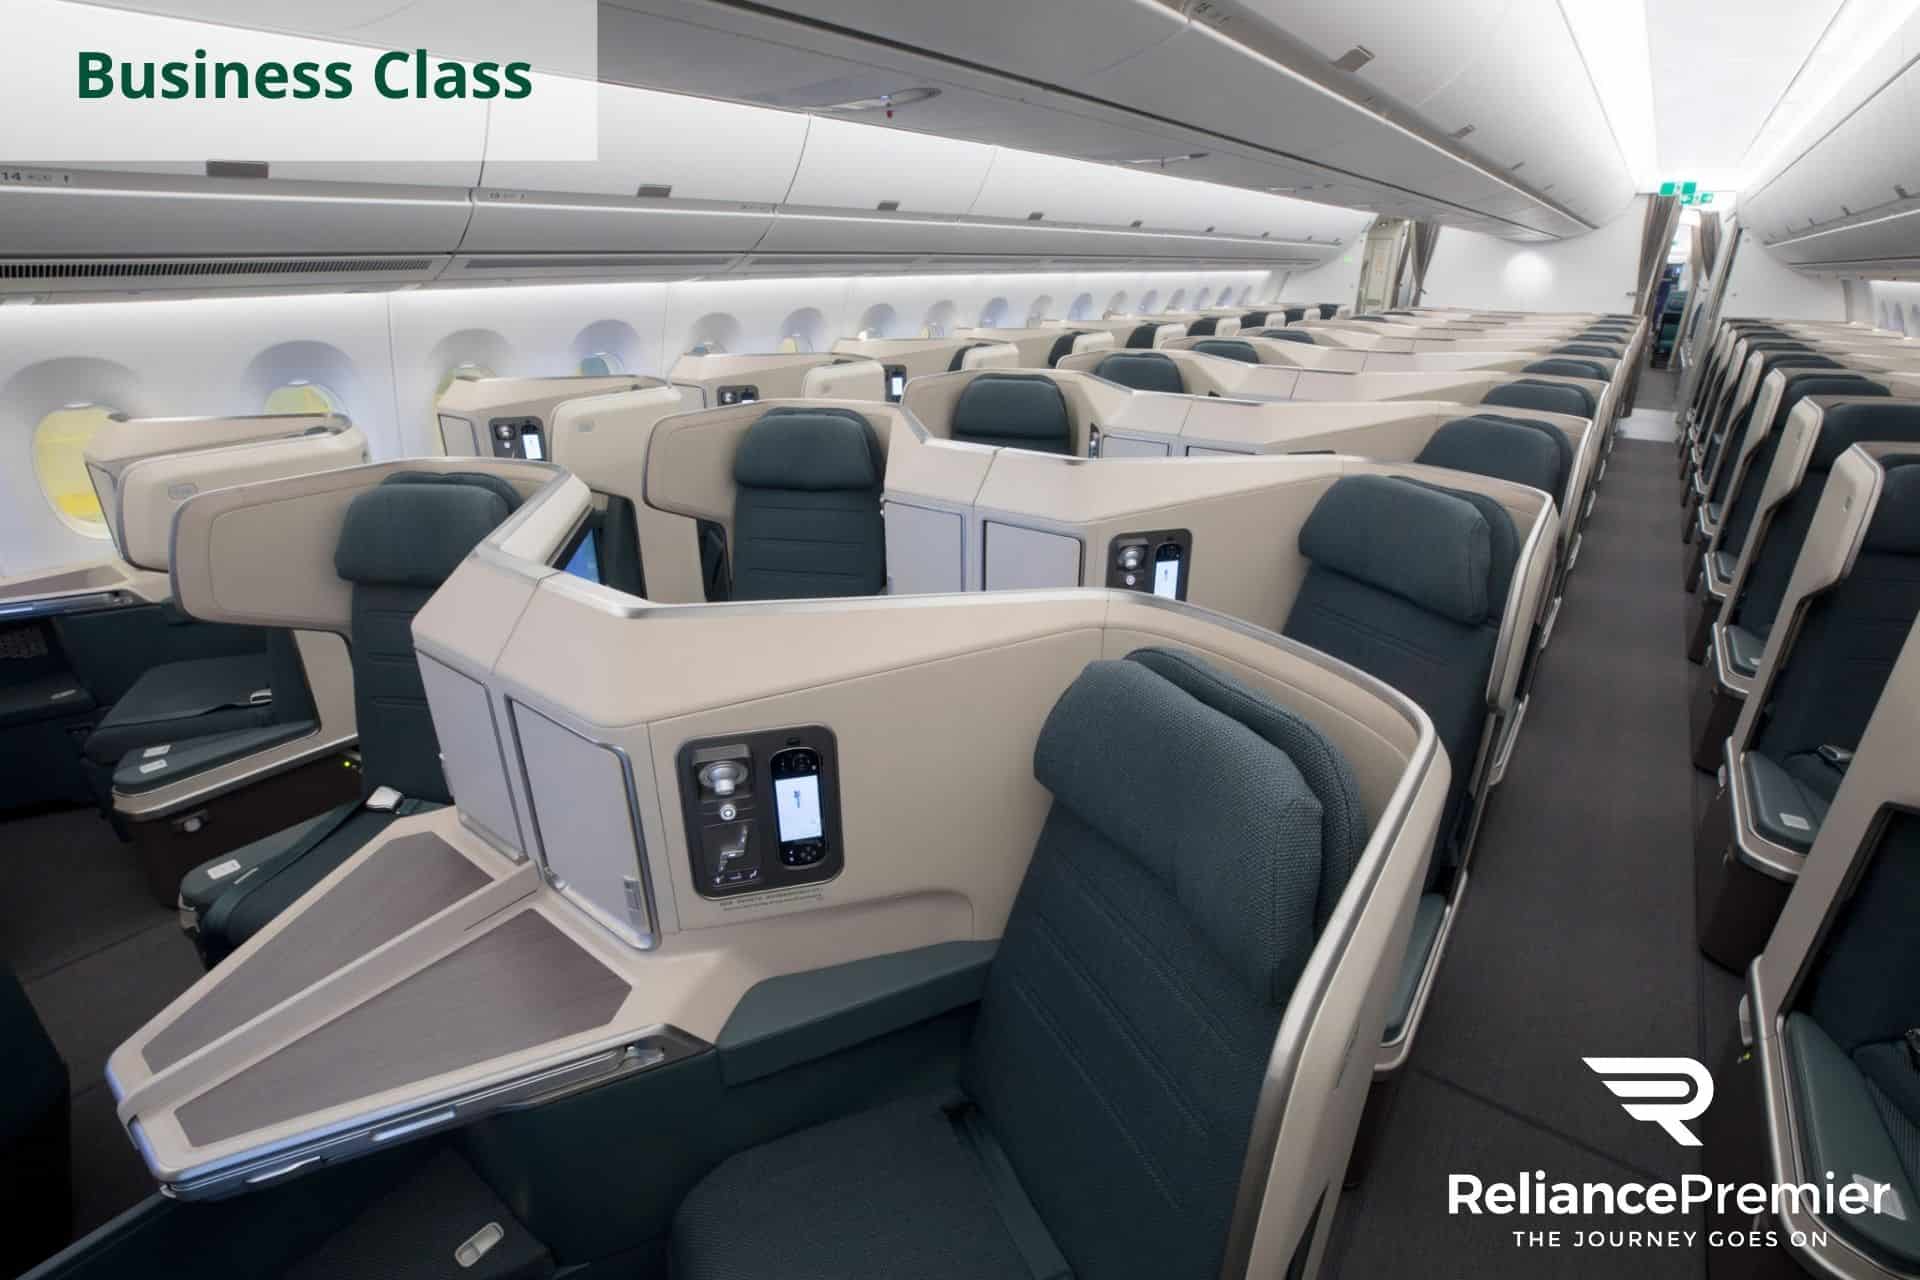 Cathay pacific Business Class